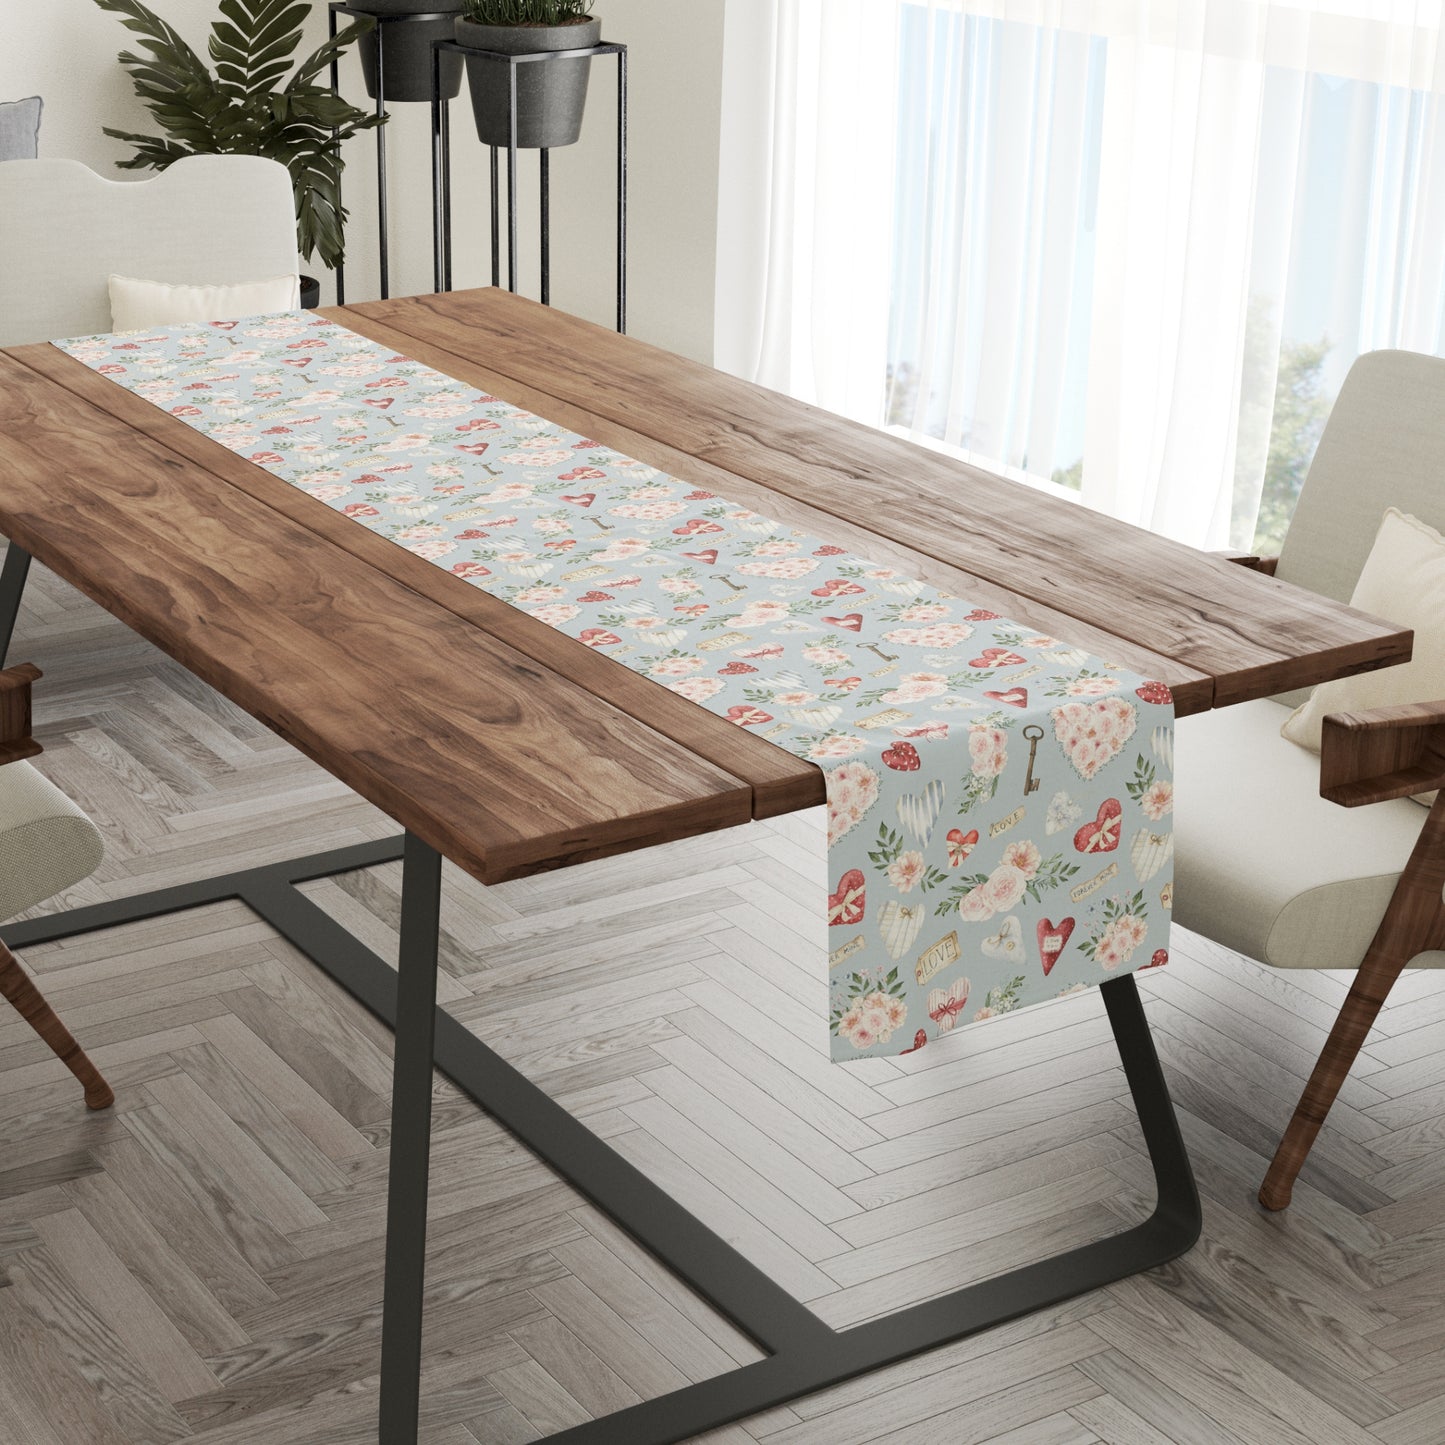 a wooden table with a floral table runner on it